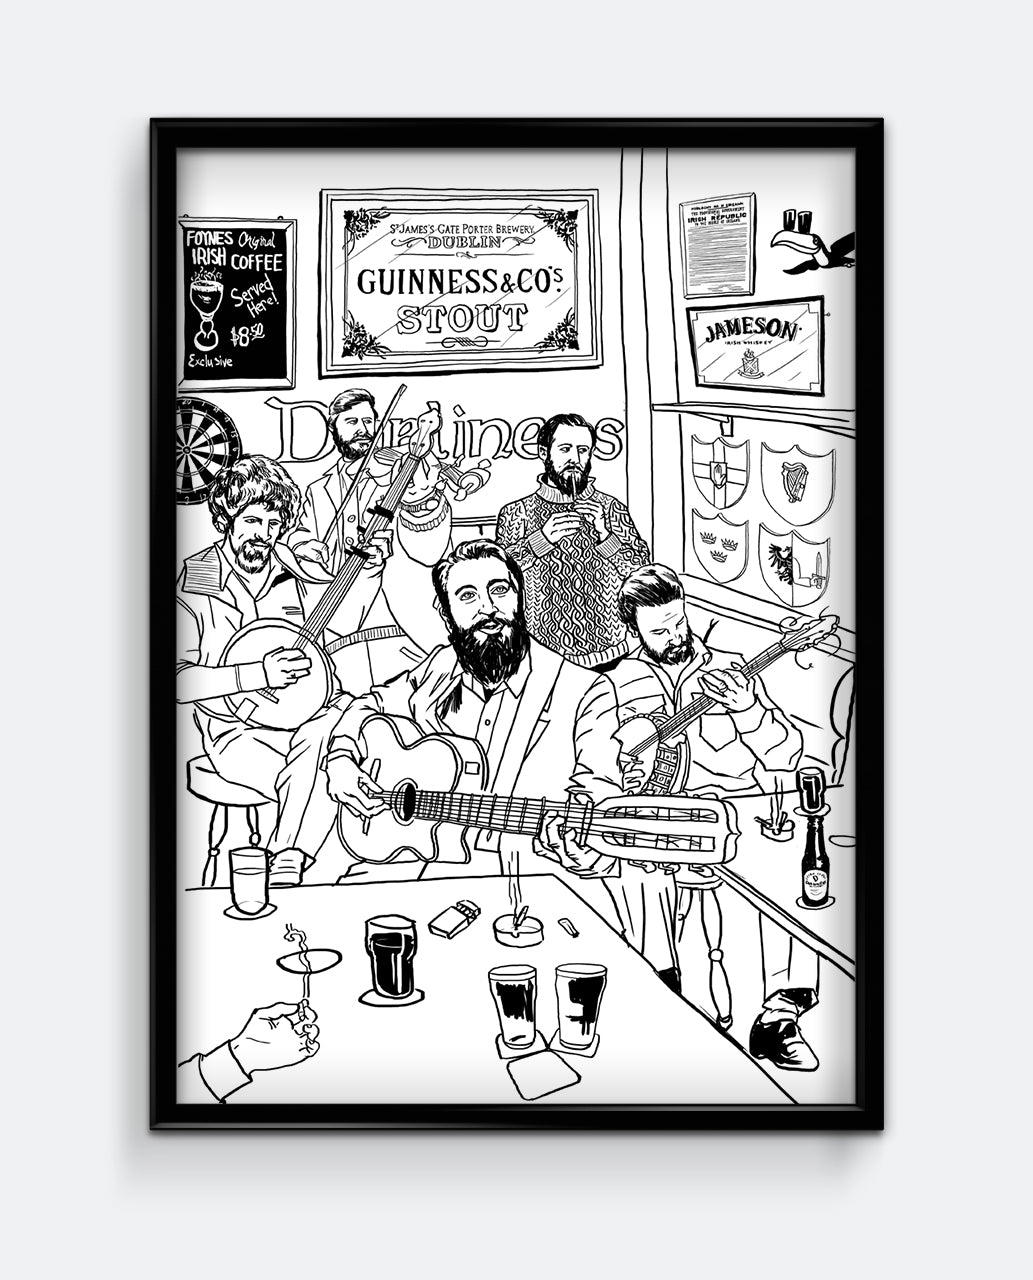 The Dubliners Print